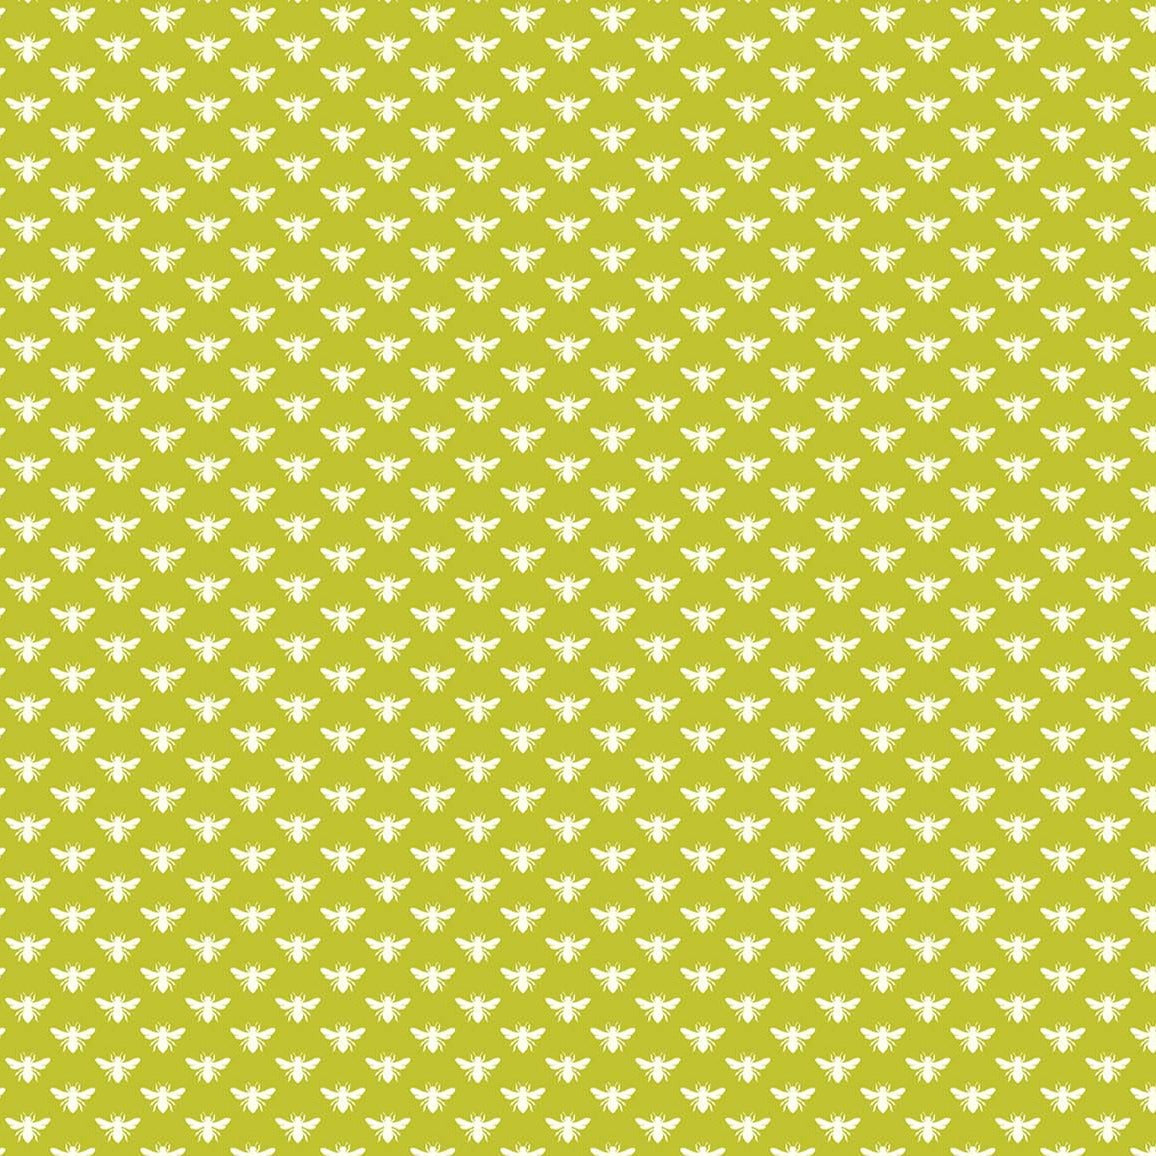 Local Honey Bees Chartreuse ½ yd-Fabric-Spool of Thread